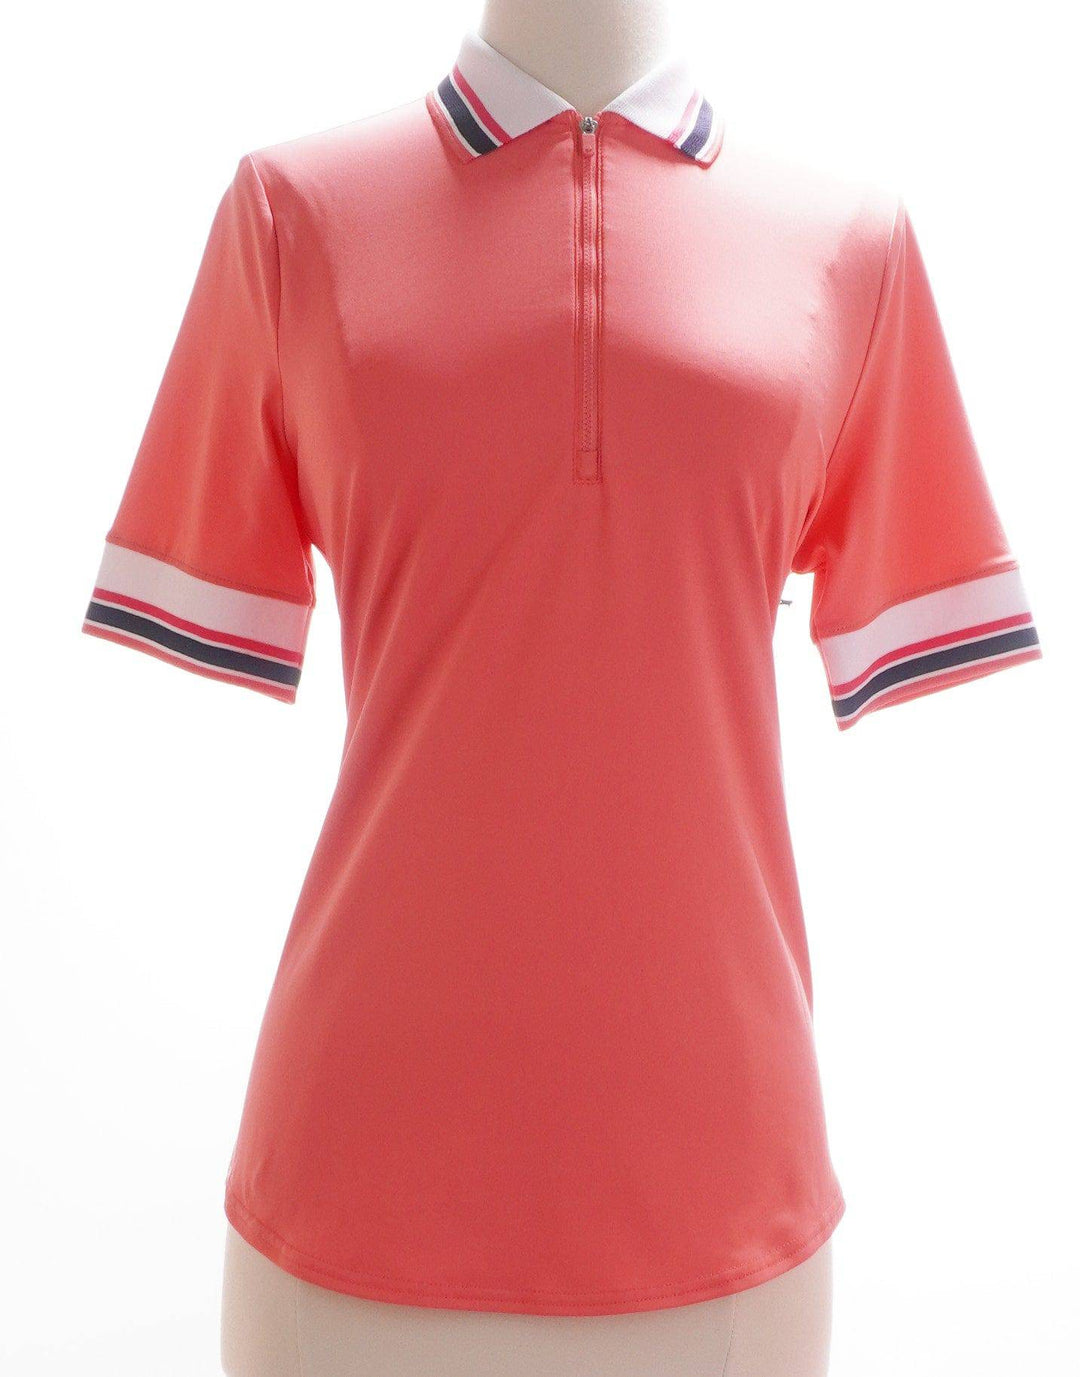 Skorzie Small / Coral Jofit 1/2 Sleeve Top Exclusive Product - Coral Polo - Size Small Apparel & Accessories